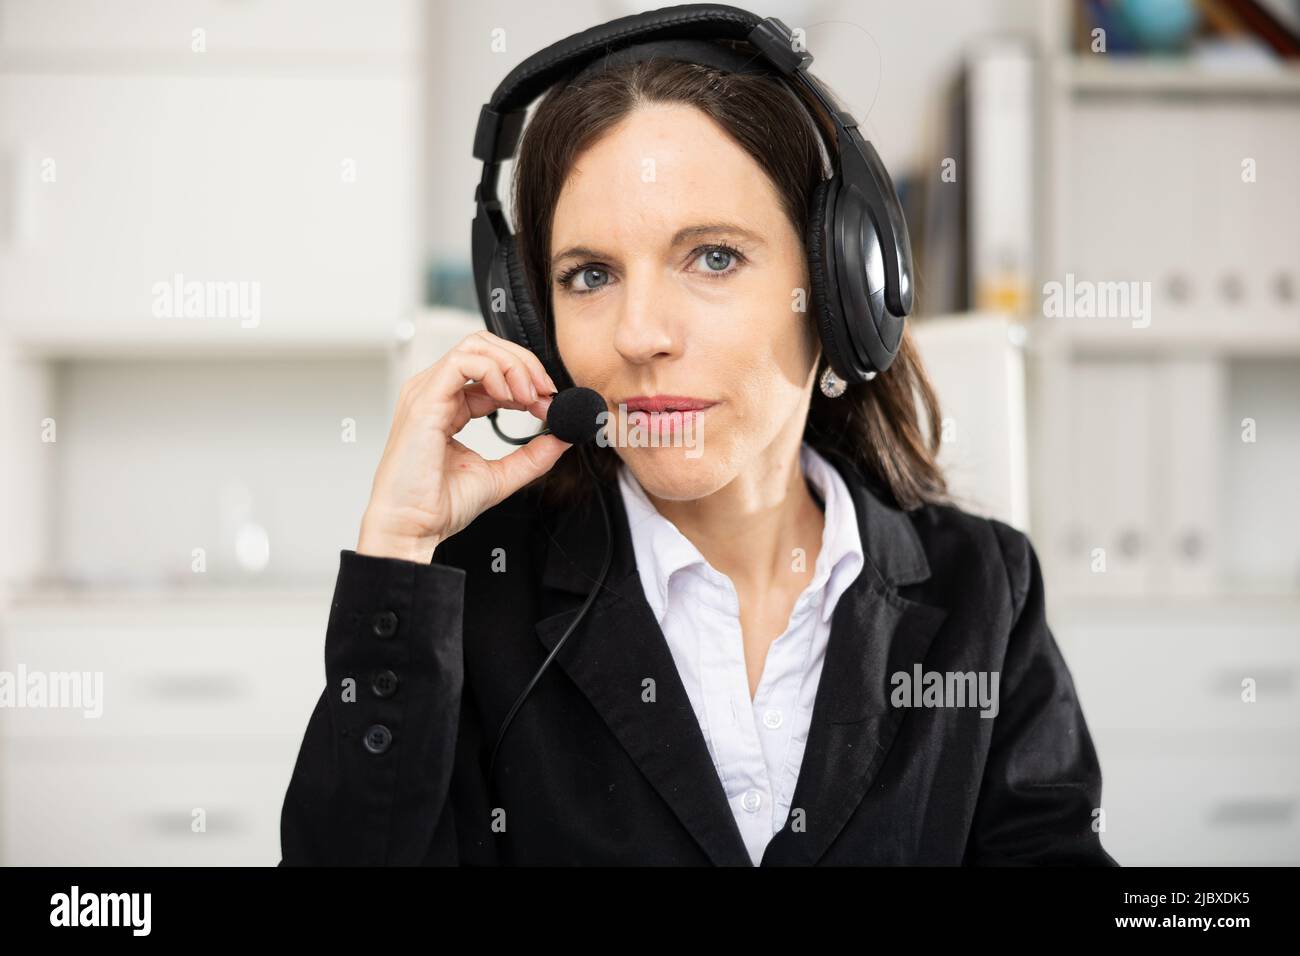 Portrait of woman office worker wearing headphones with microphone Stock Photo